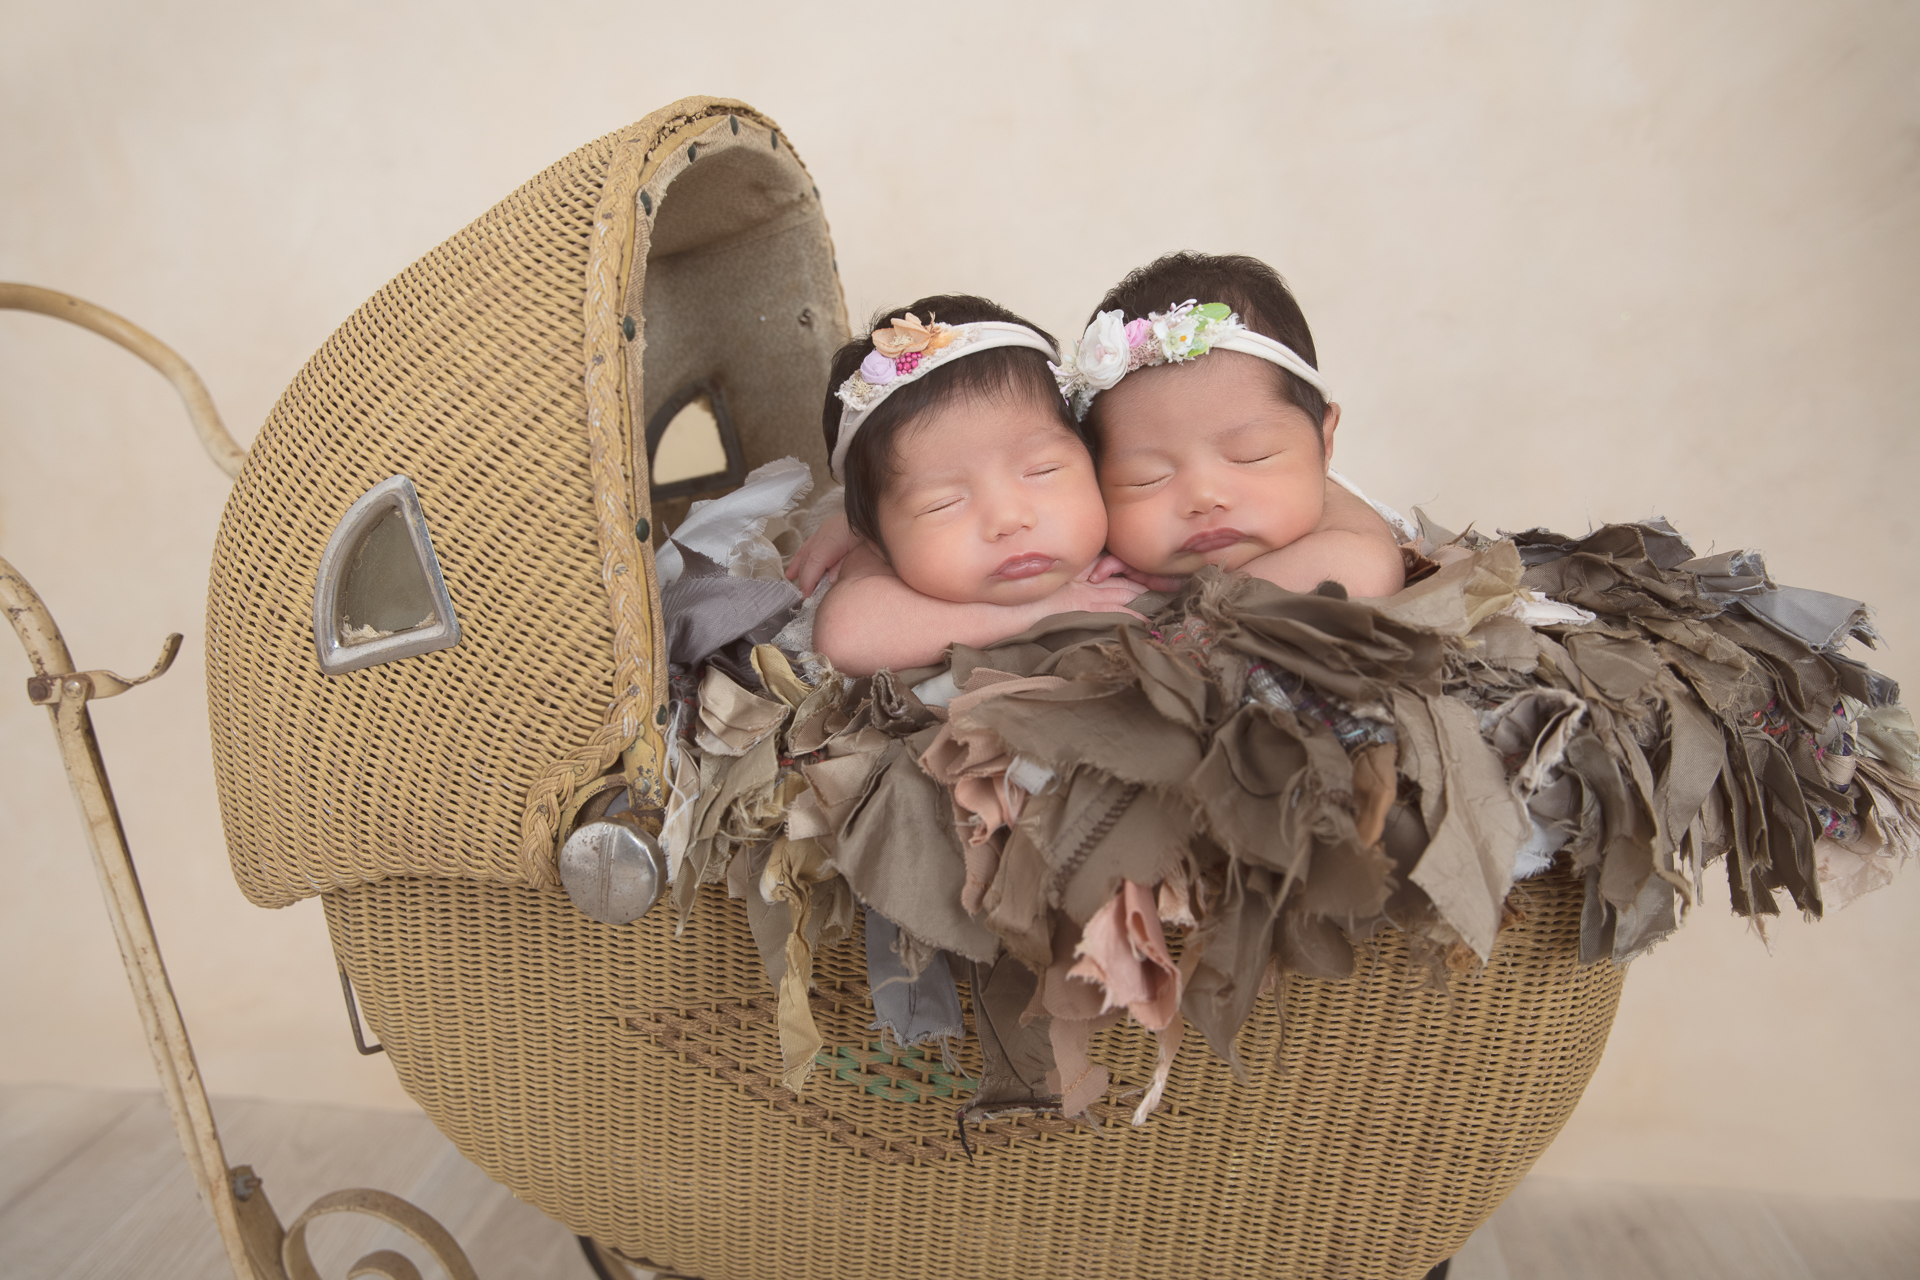 2 newborn sisters rest together in a old fashion decorative brown colored stroller, light brown backdrop, light colored headbands